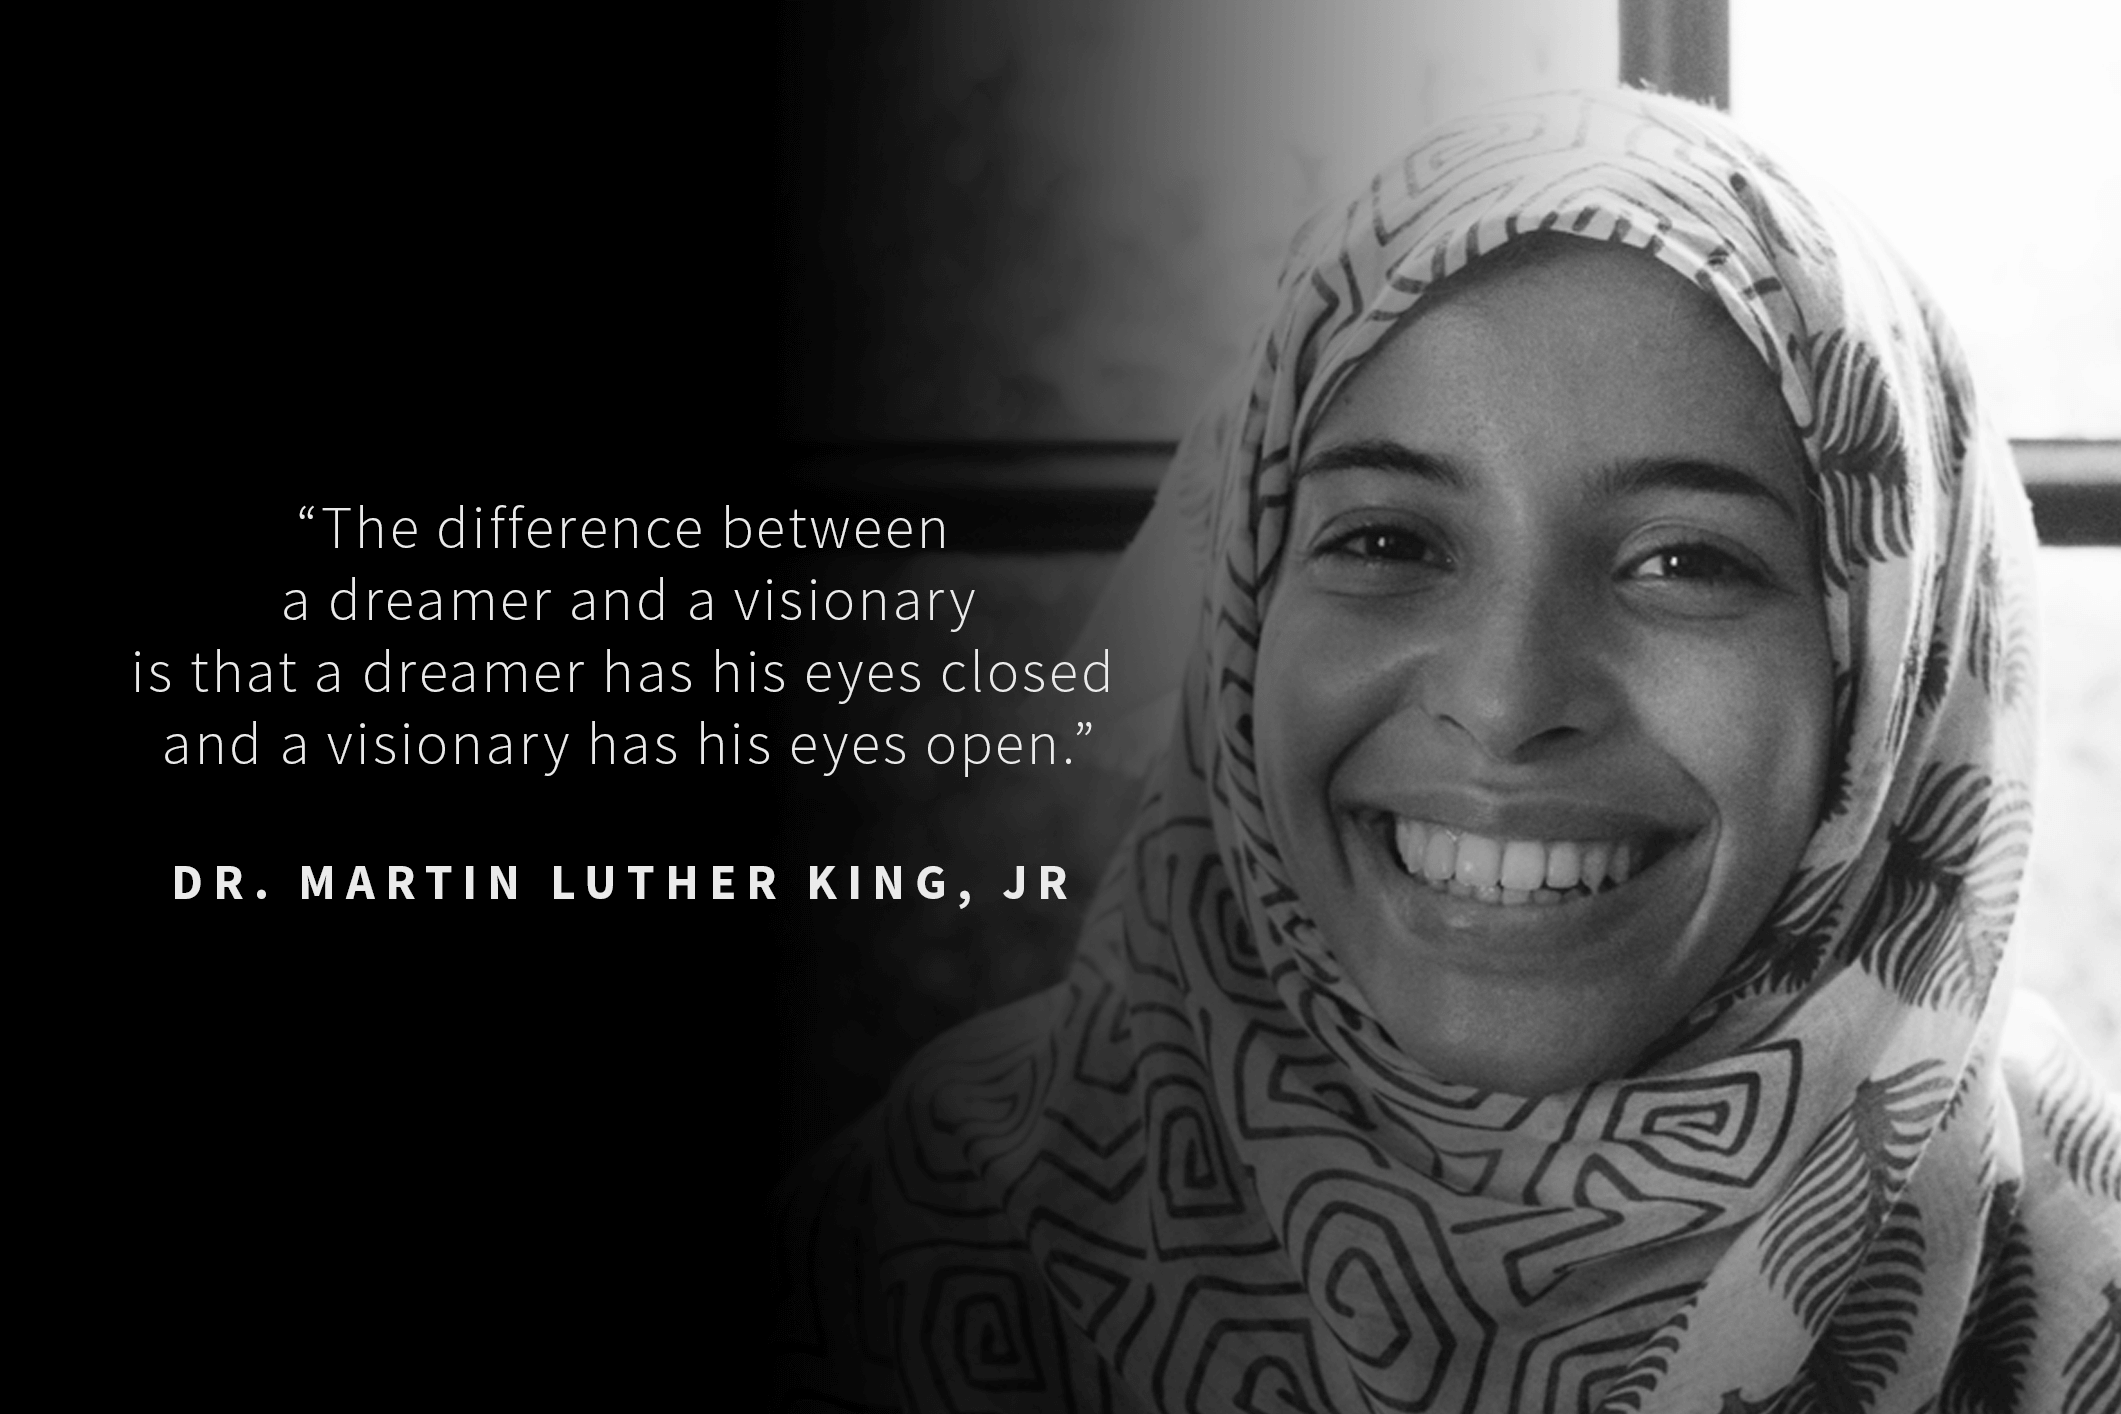 Martin Luther King Jr quote to the left hand side, with woman'' smiling face to the right hand side. She is wearing a hijab.